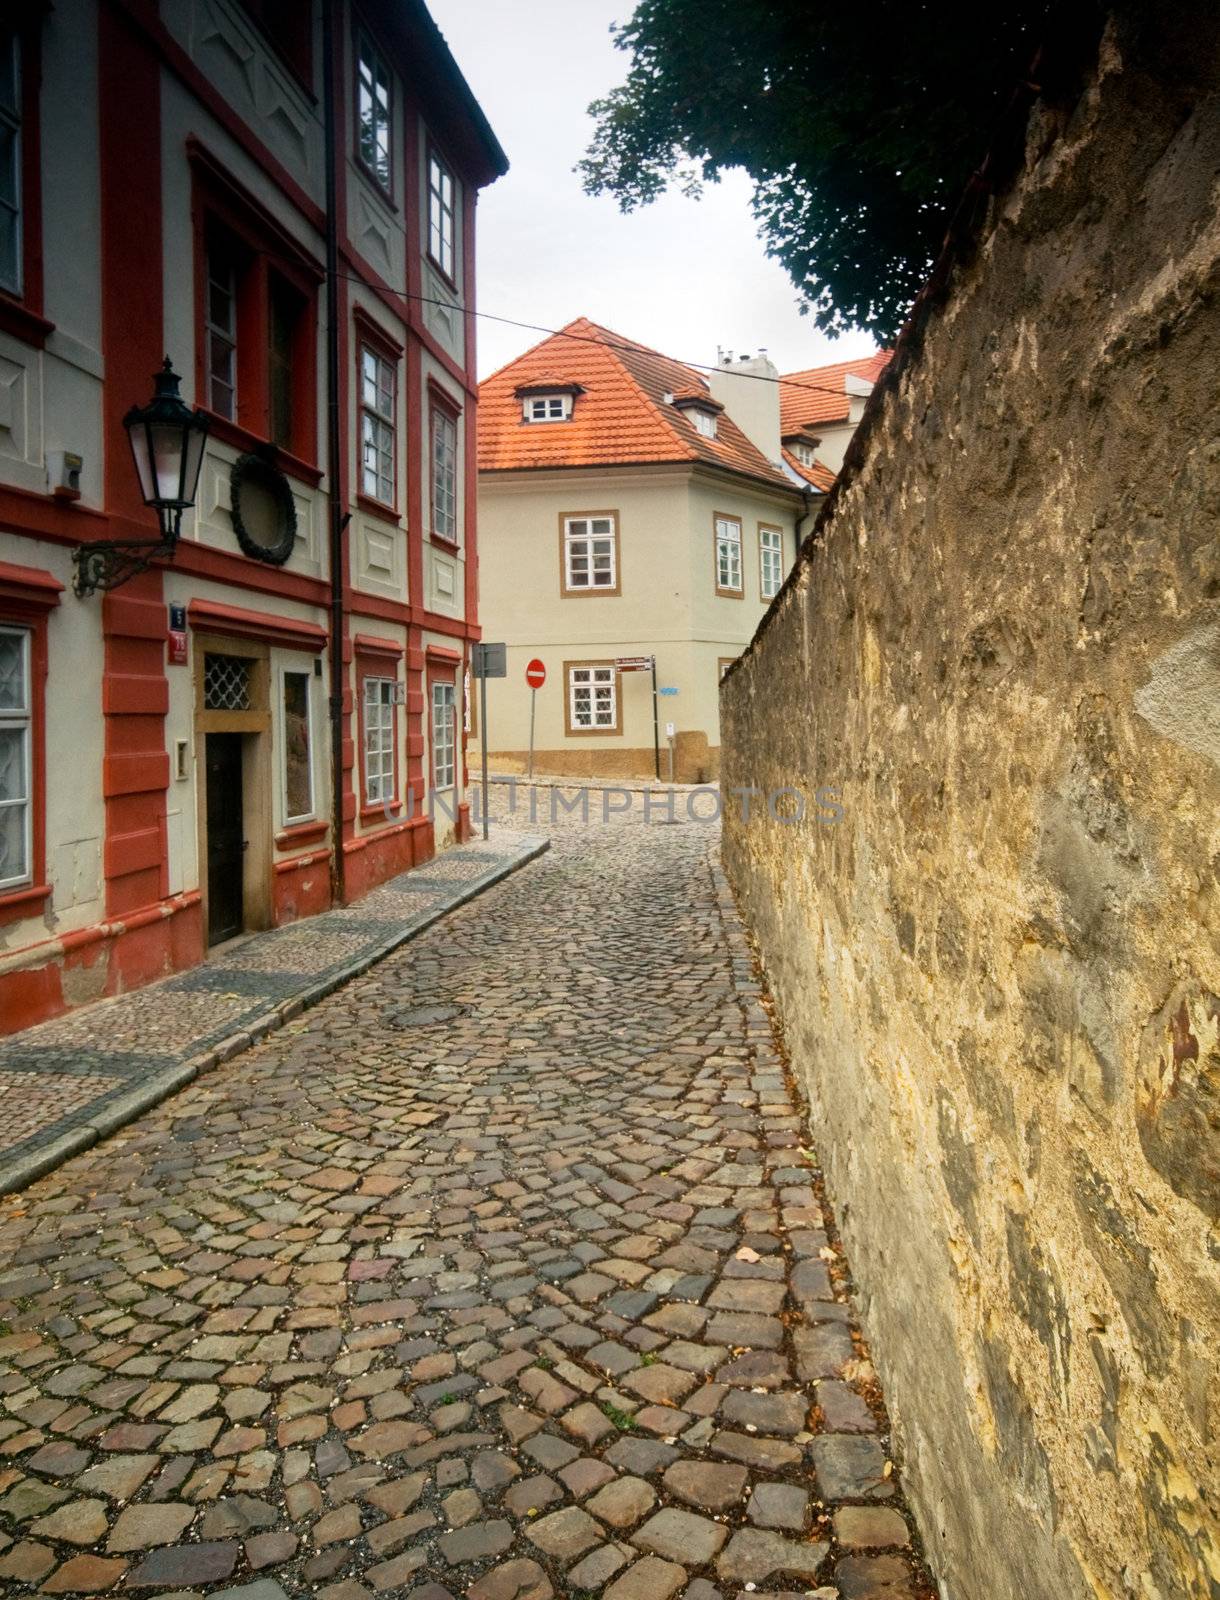 Prague. Old, charming street and buildings